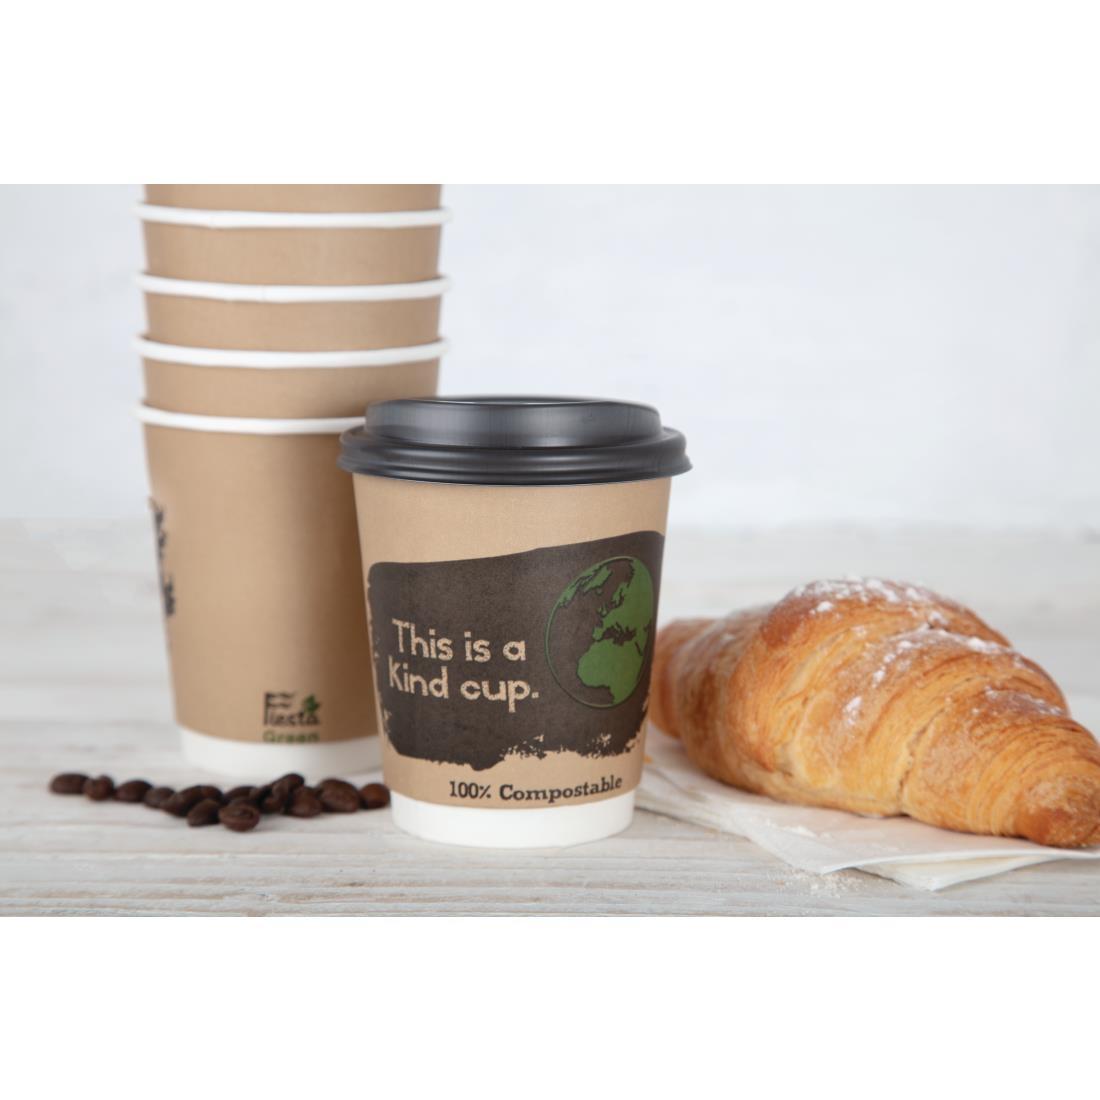 Fiesta Compostable Coffee Cups Double Wall 227ml / 8oz (Pack of 25) - DY984  - 5